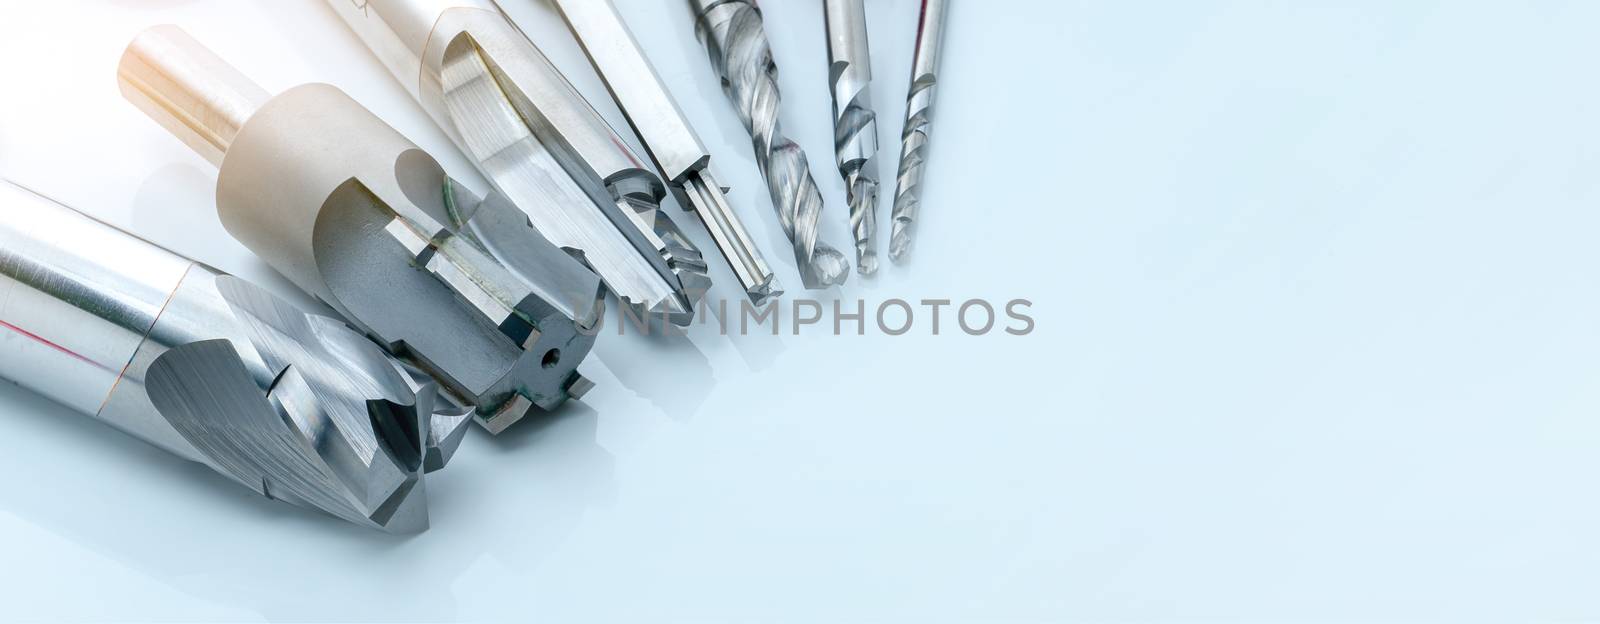 Special tools isolated on white background. Made to order special tools. Coated step drill and reamer detail. HSS cemented carbide. Carbide cutting tool for industrial applications. Engineering tools.